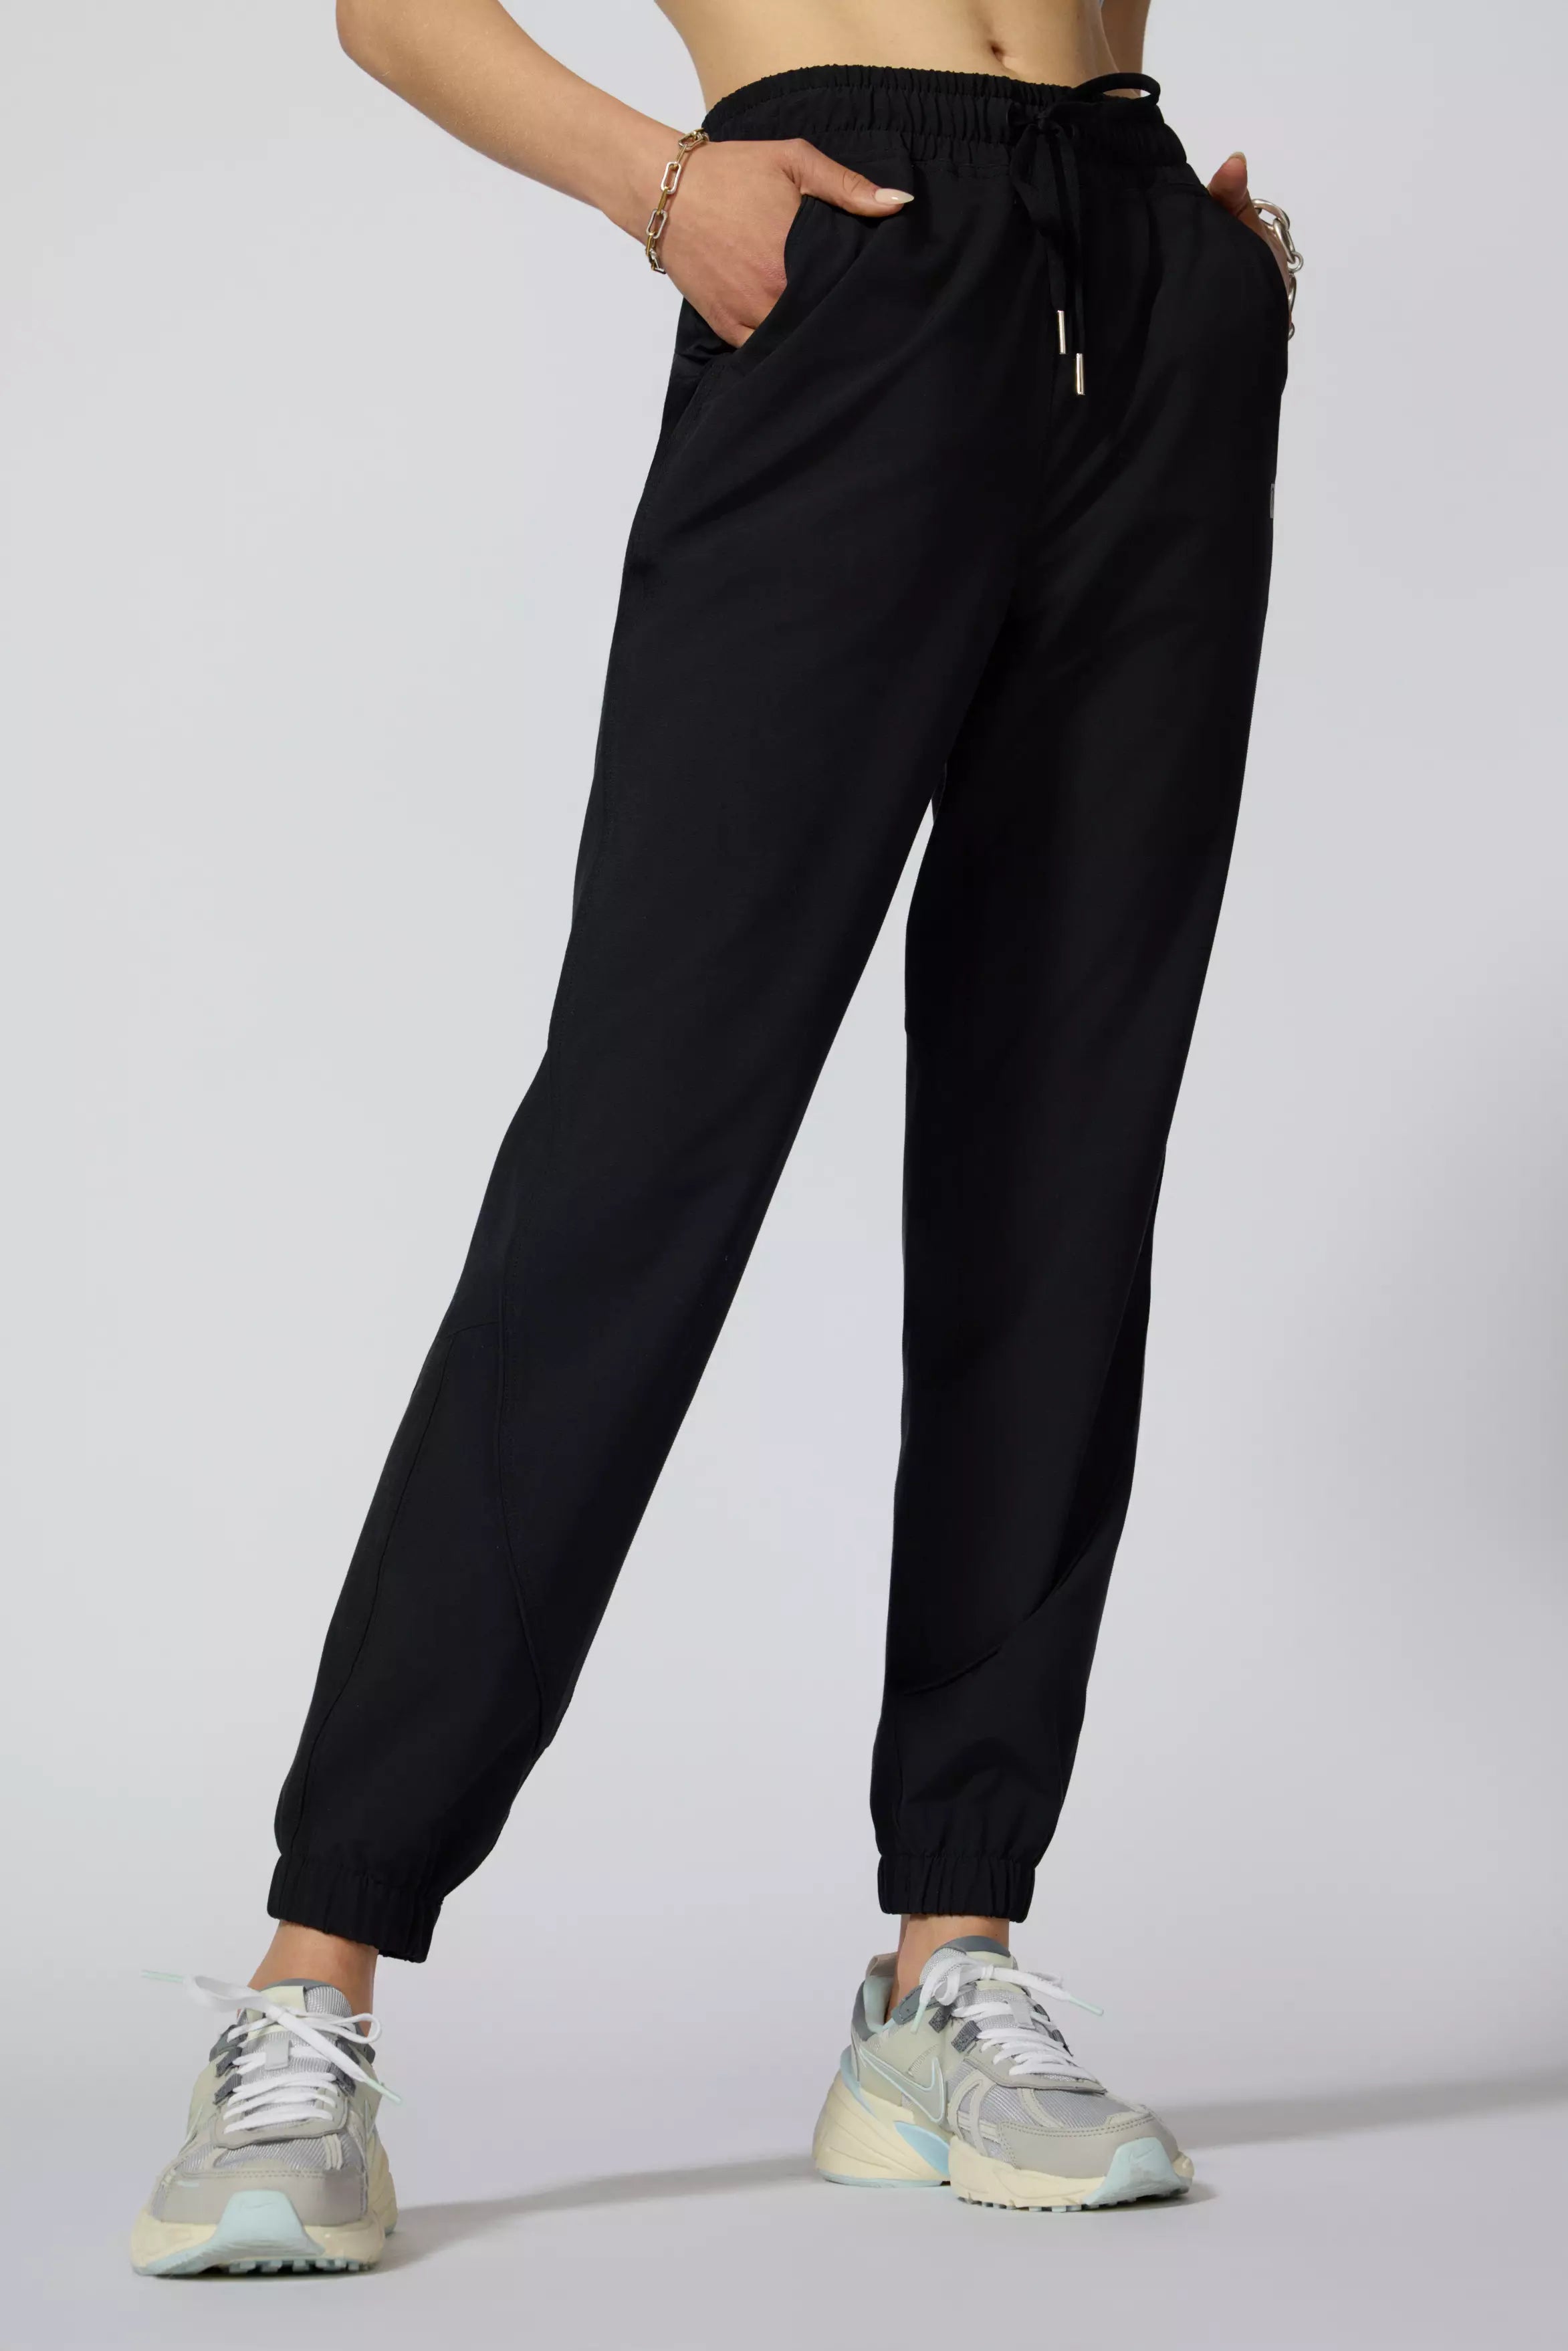 Rove Core High-Waisted Panelled Jogger 28.5"